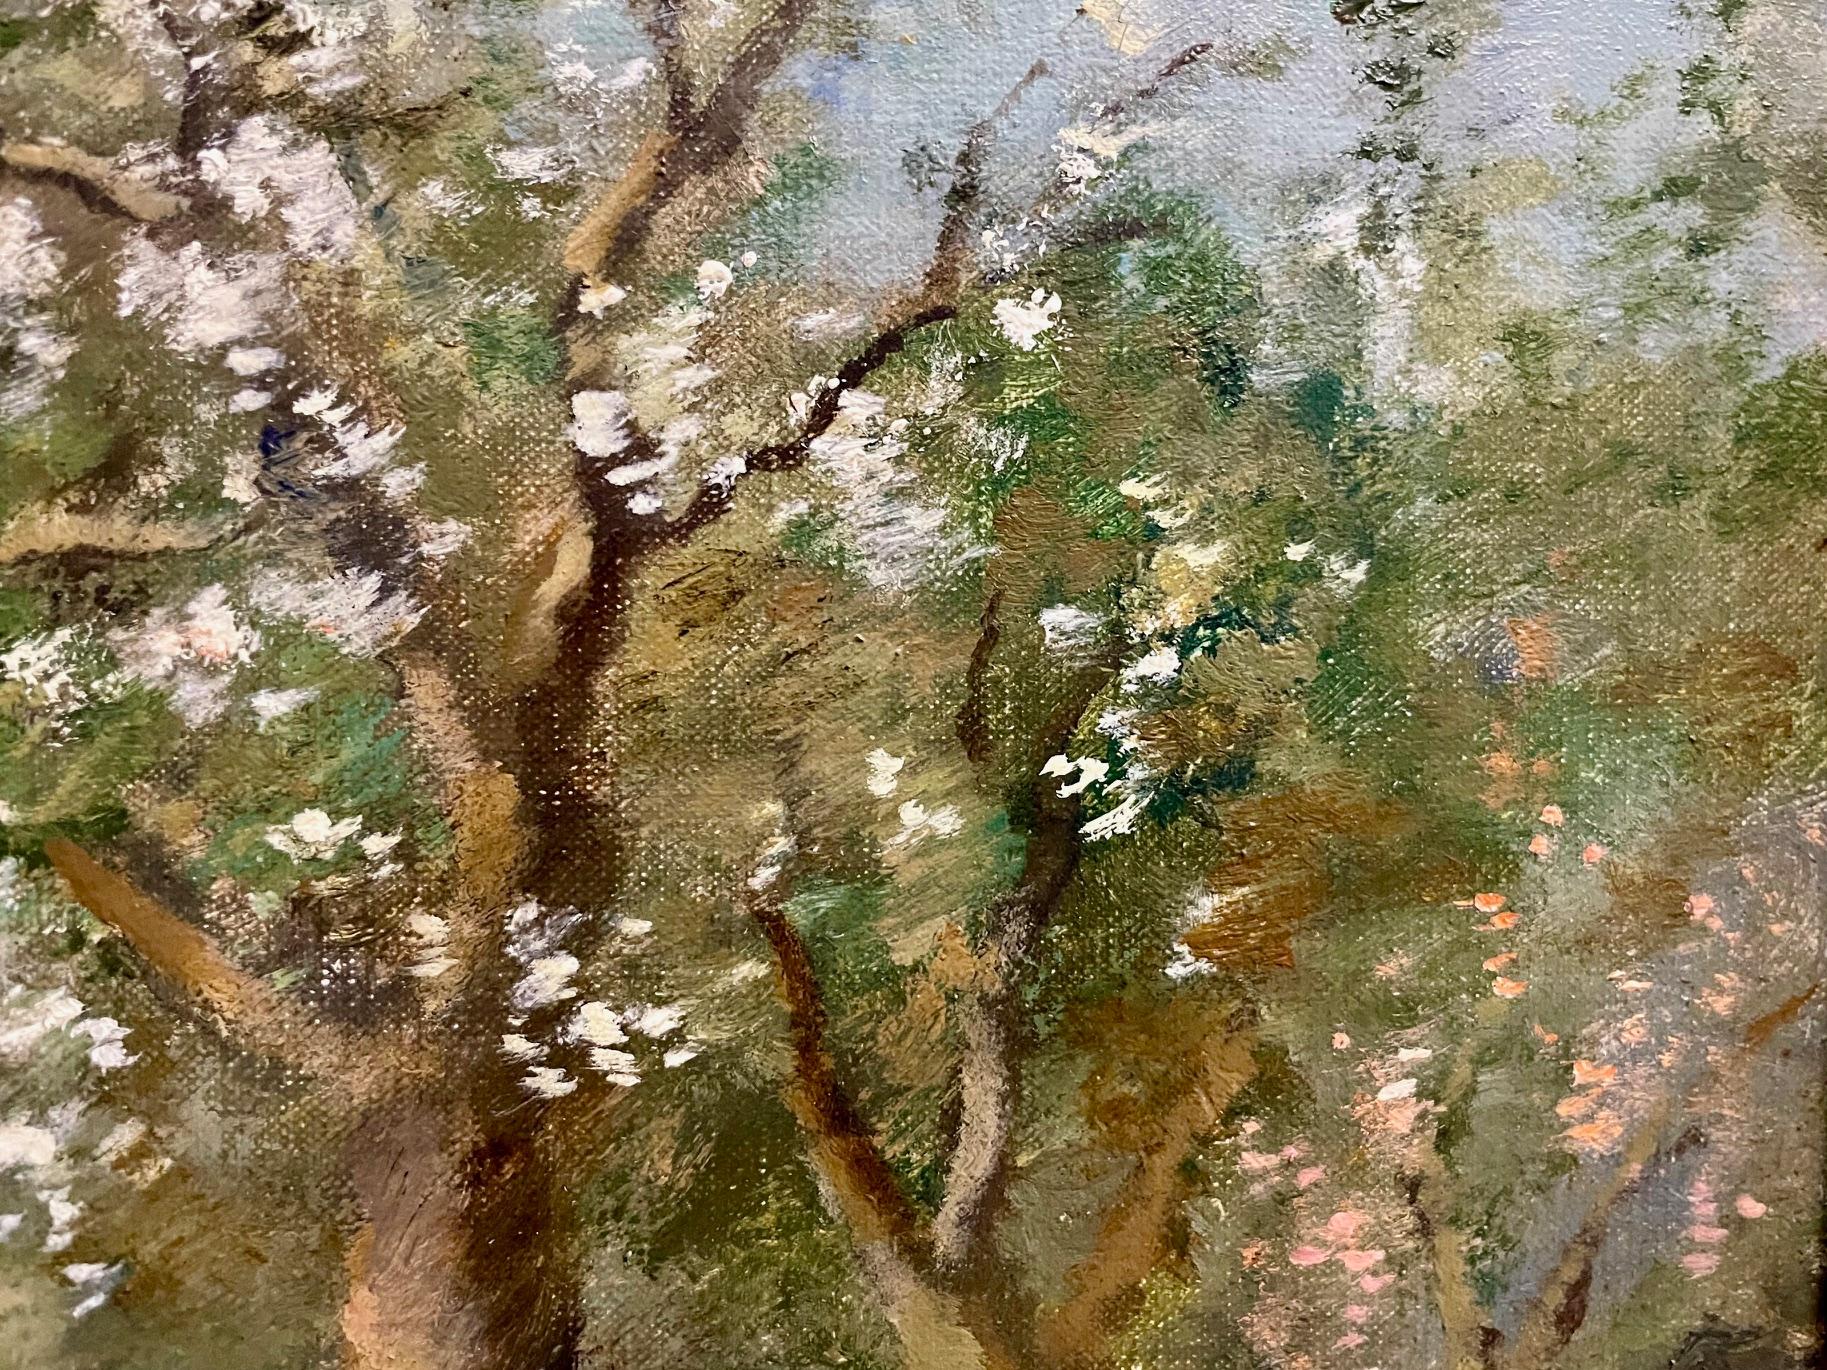 Springtime, 'In the Meadow' by Cornelis Bouter (1888-1966) is a Dutch painting with figures and landscape in an impressionist style with early spring blossoms. Idyllic scene by a river under tree blossoms, this fine oil on canvas painting is very